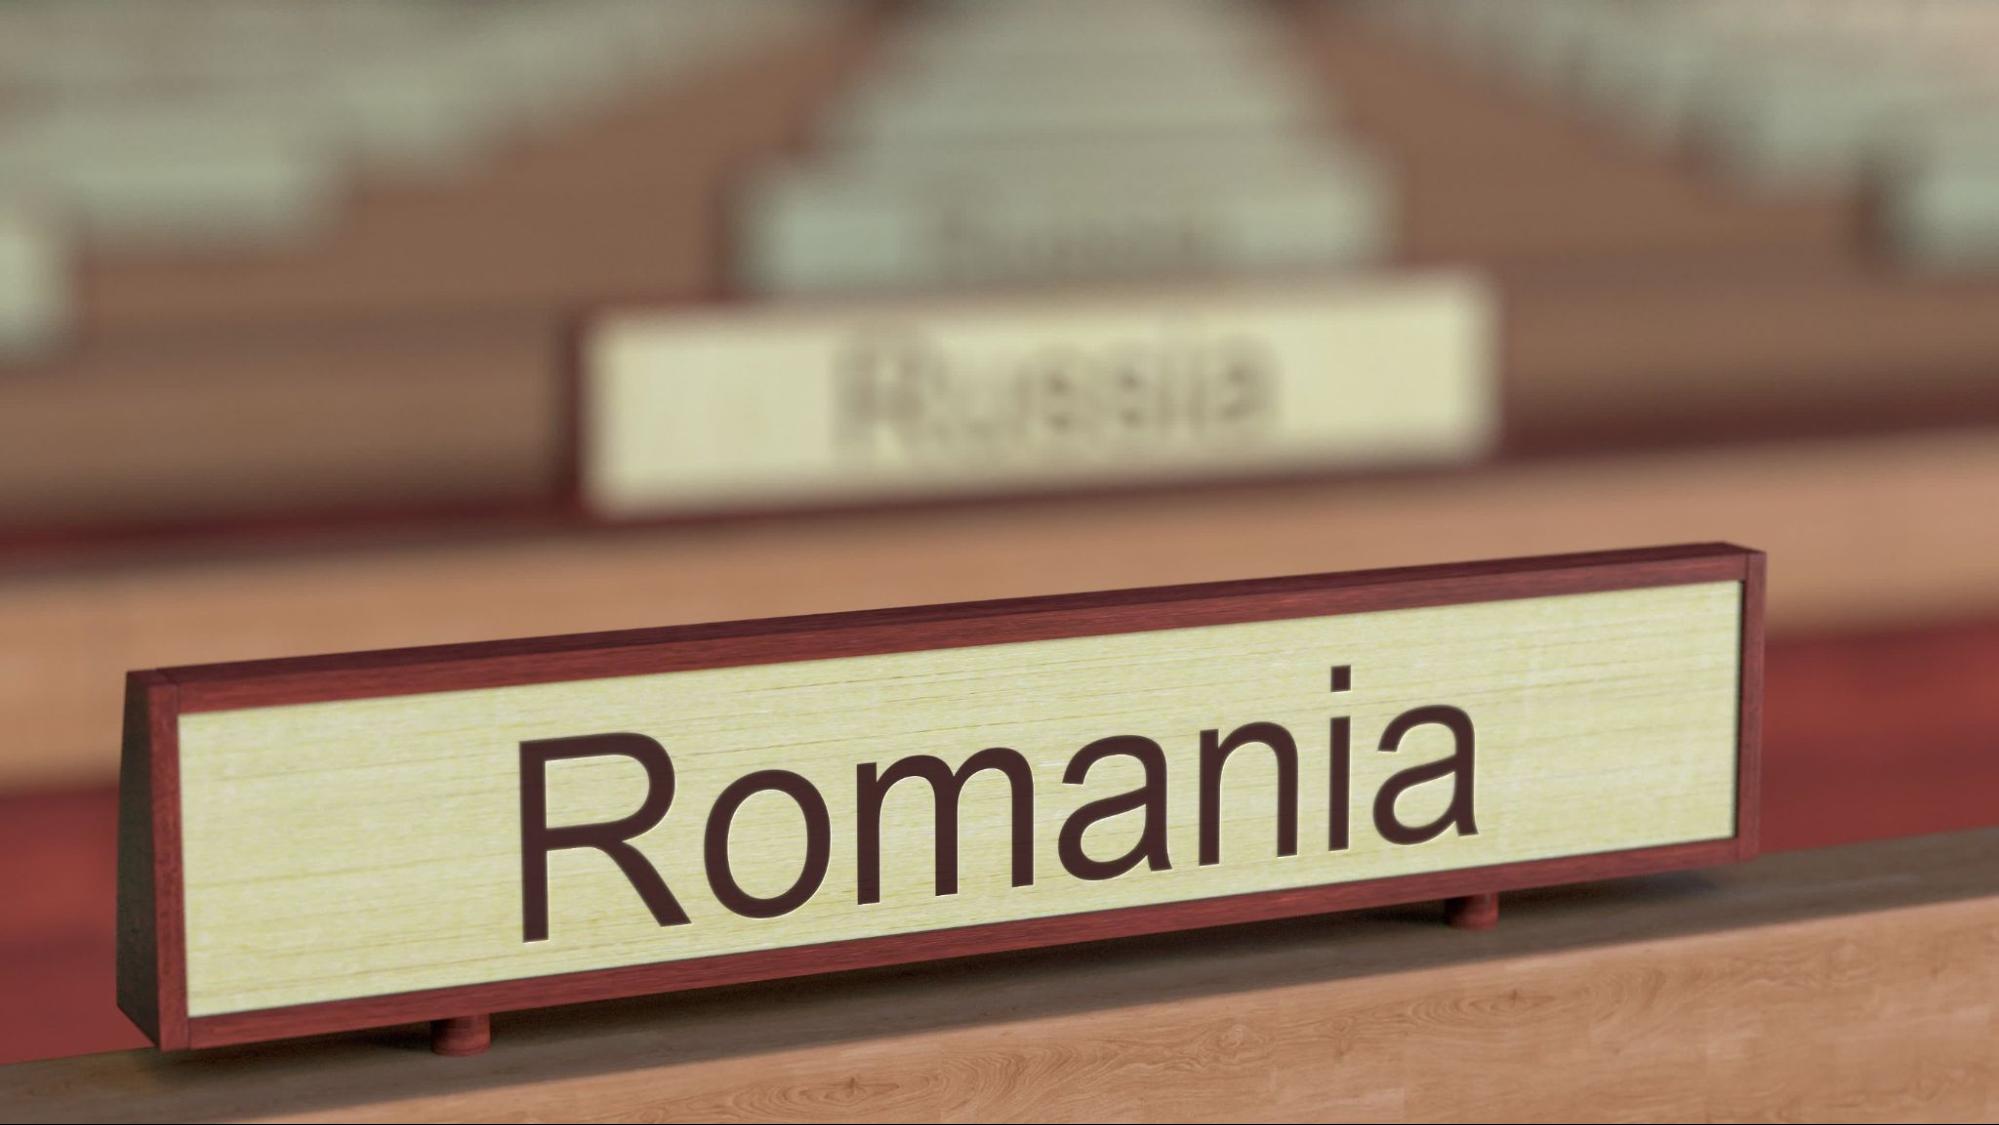 Romania name sign among different countries plaques at international organization